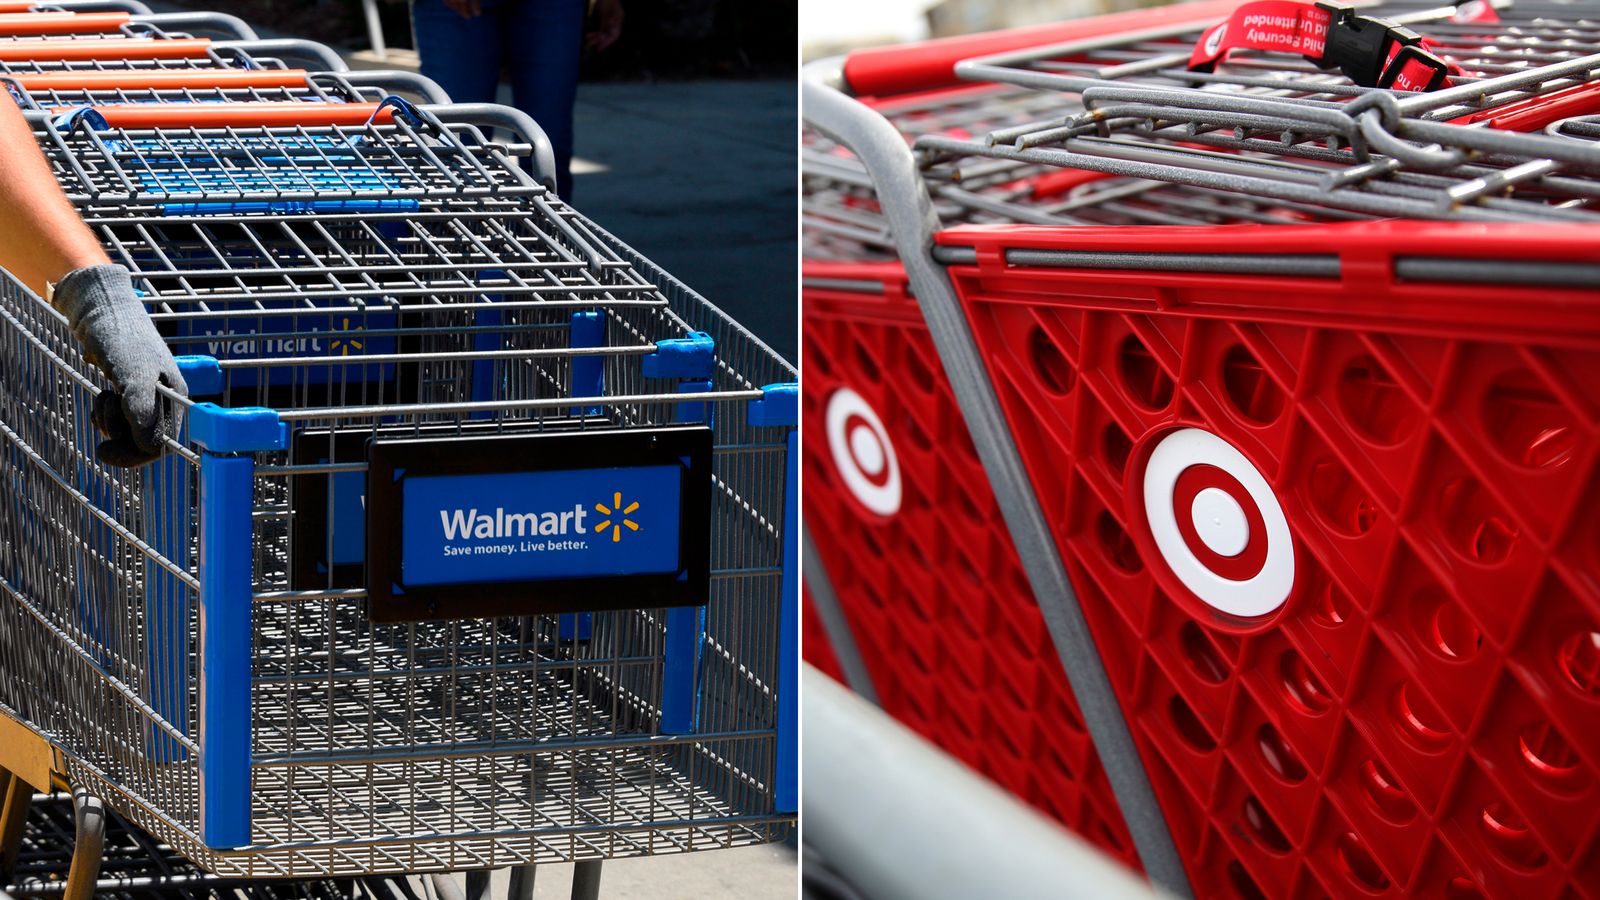 Walmart doubles personal shopper count for holiday season